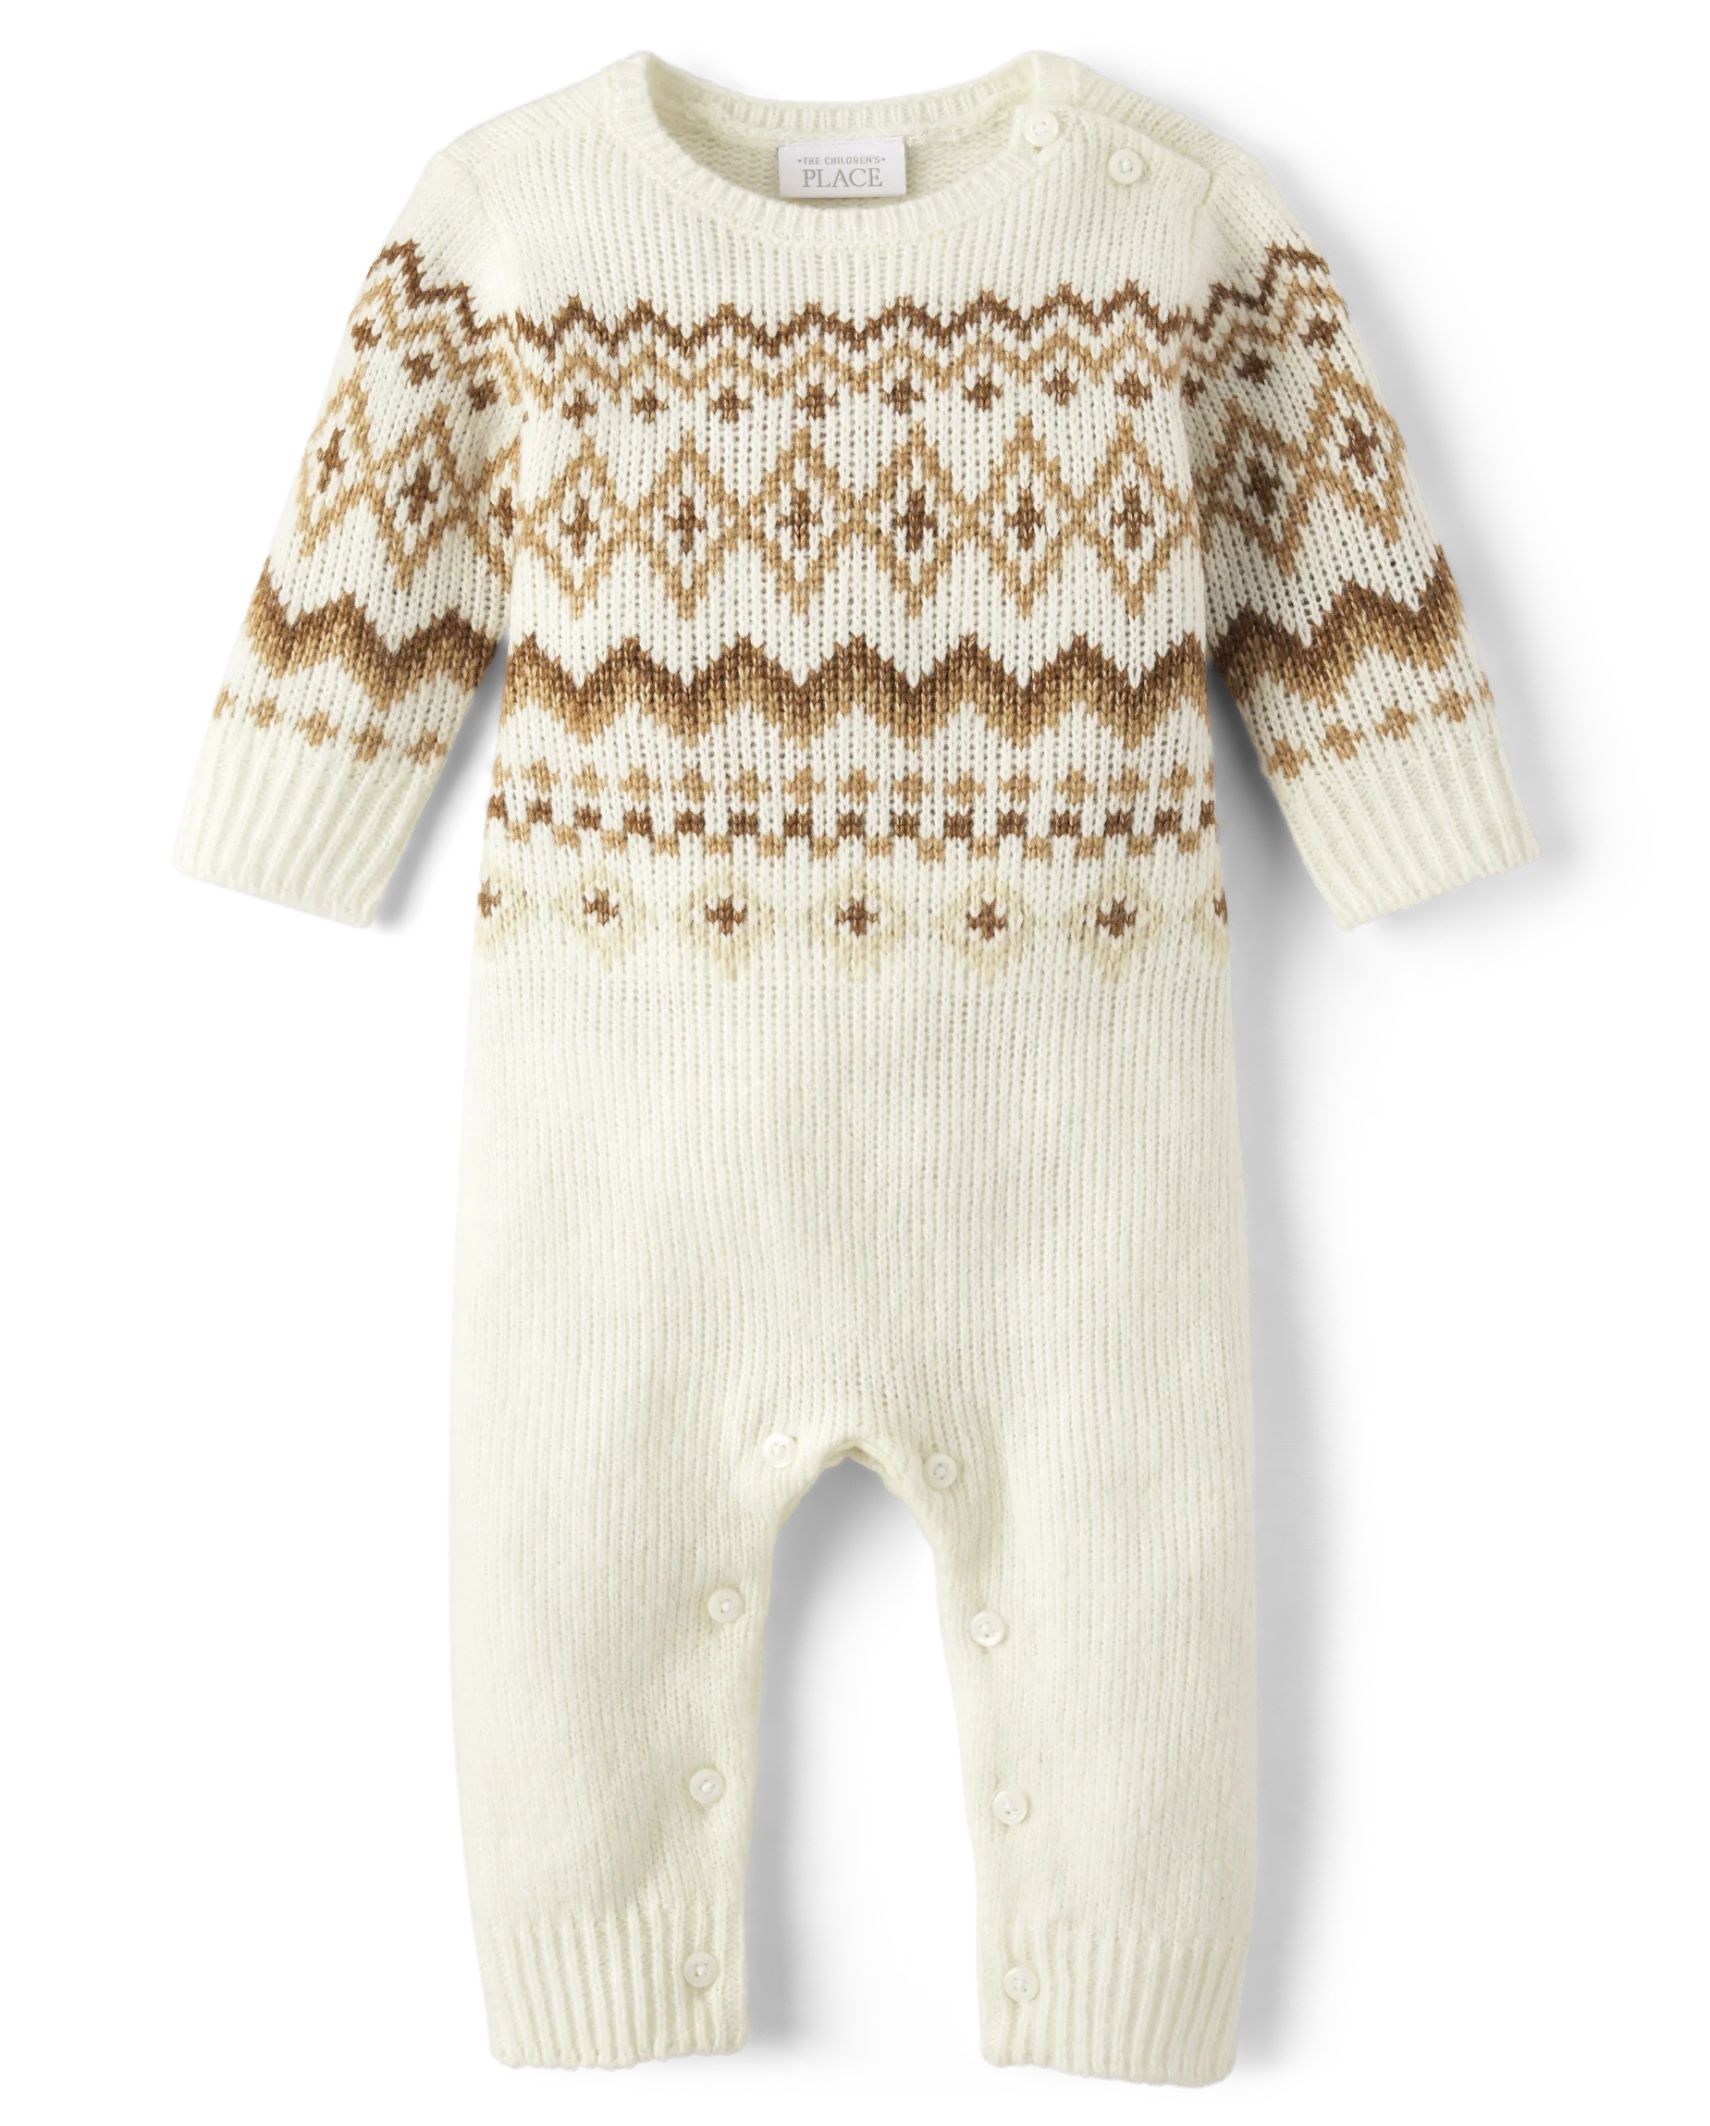 Unisex Baby Matching Family Fairisle Sweater Romper - bunnys tail | The Children's Place